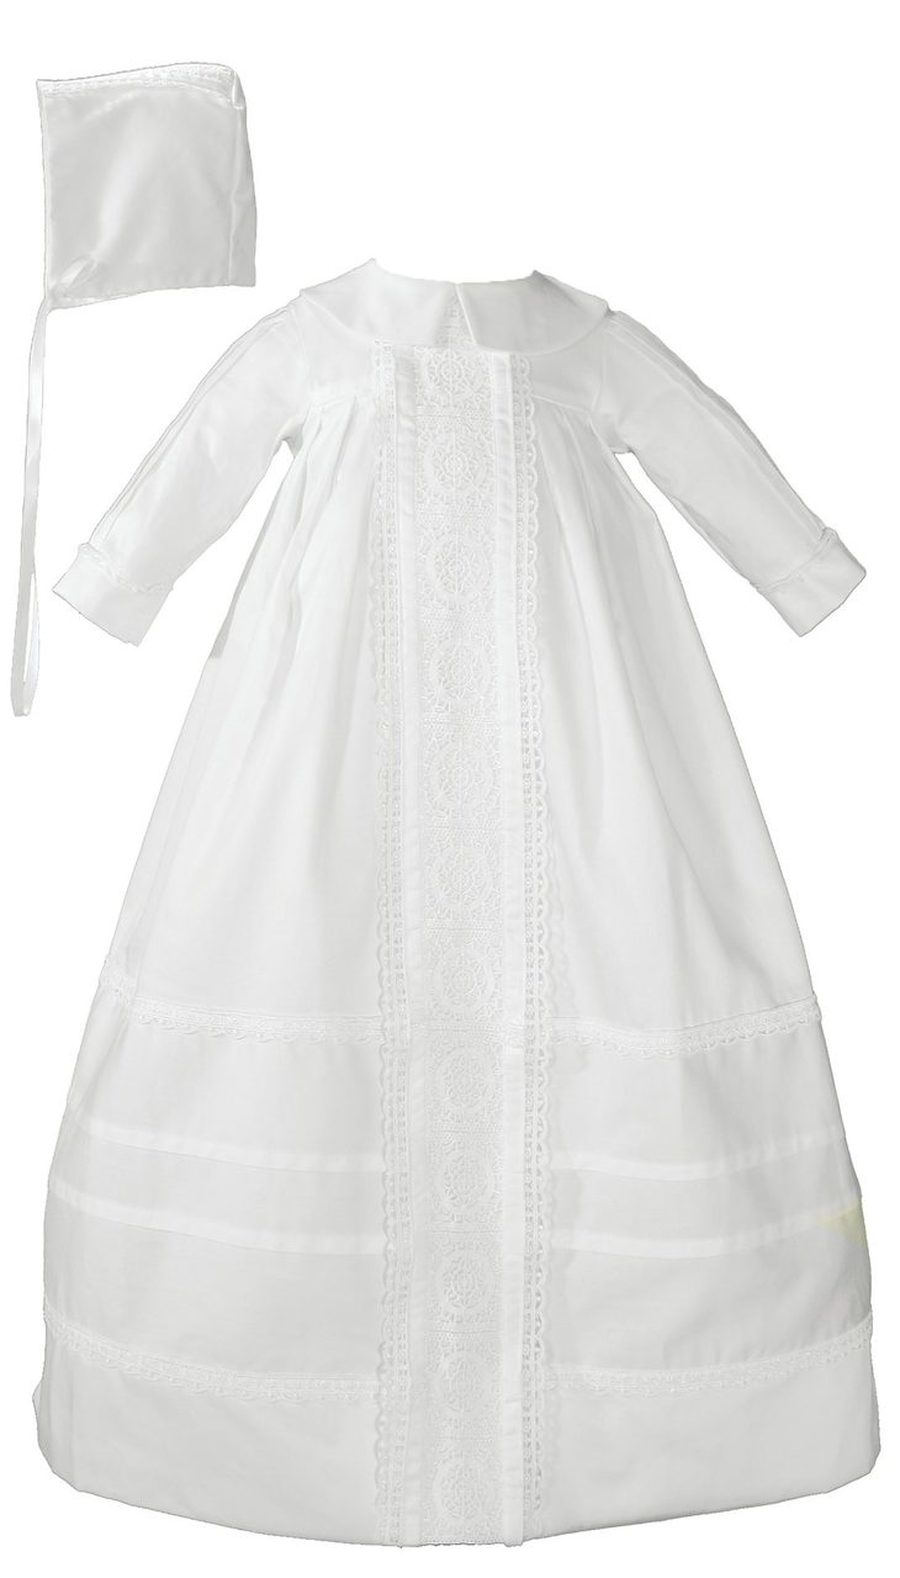 Cotton Sateen Bishop’s Christening Baptism Gown and Bonnet, Unisex